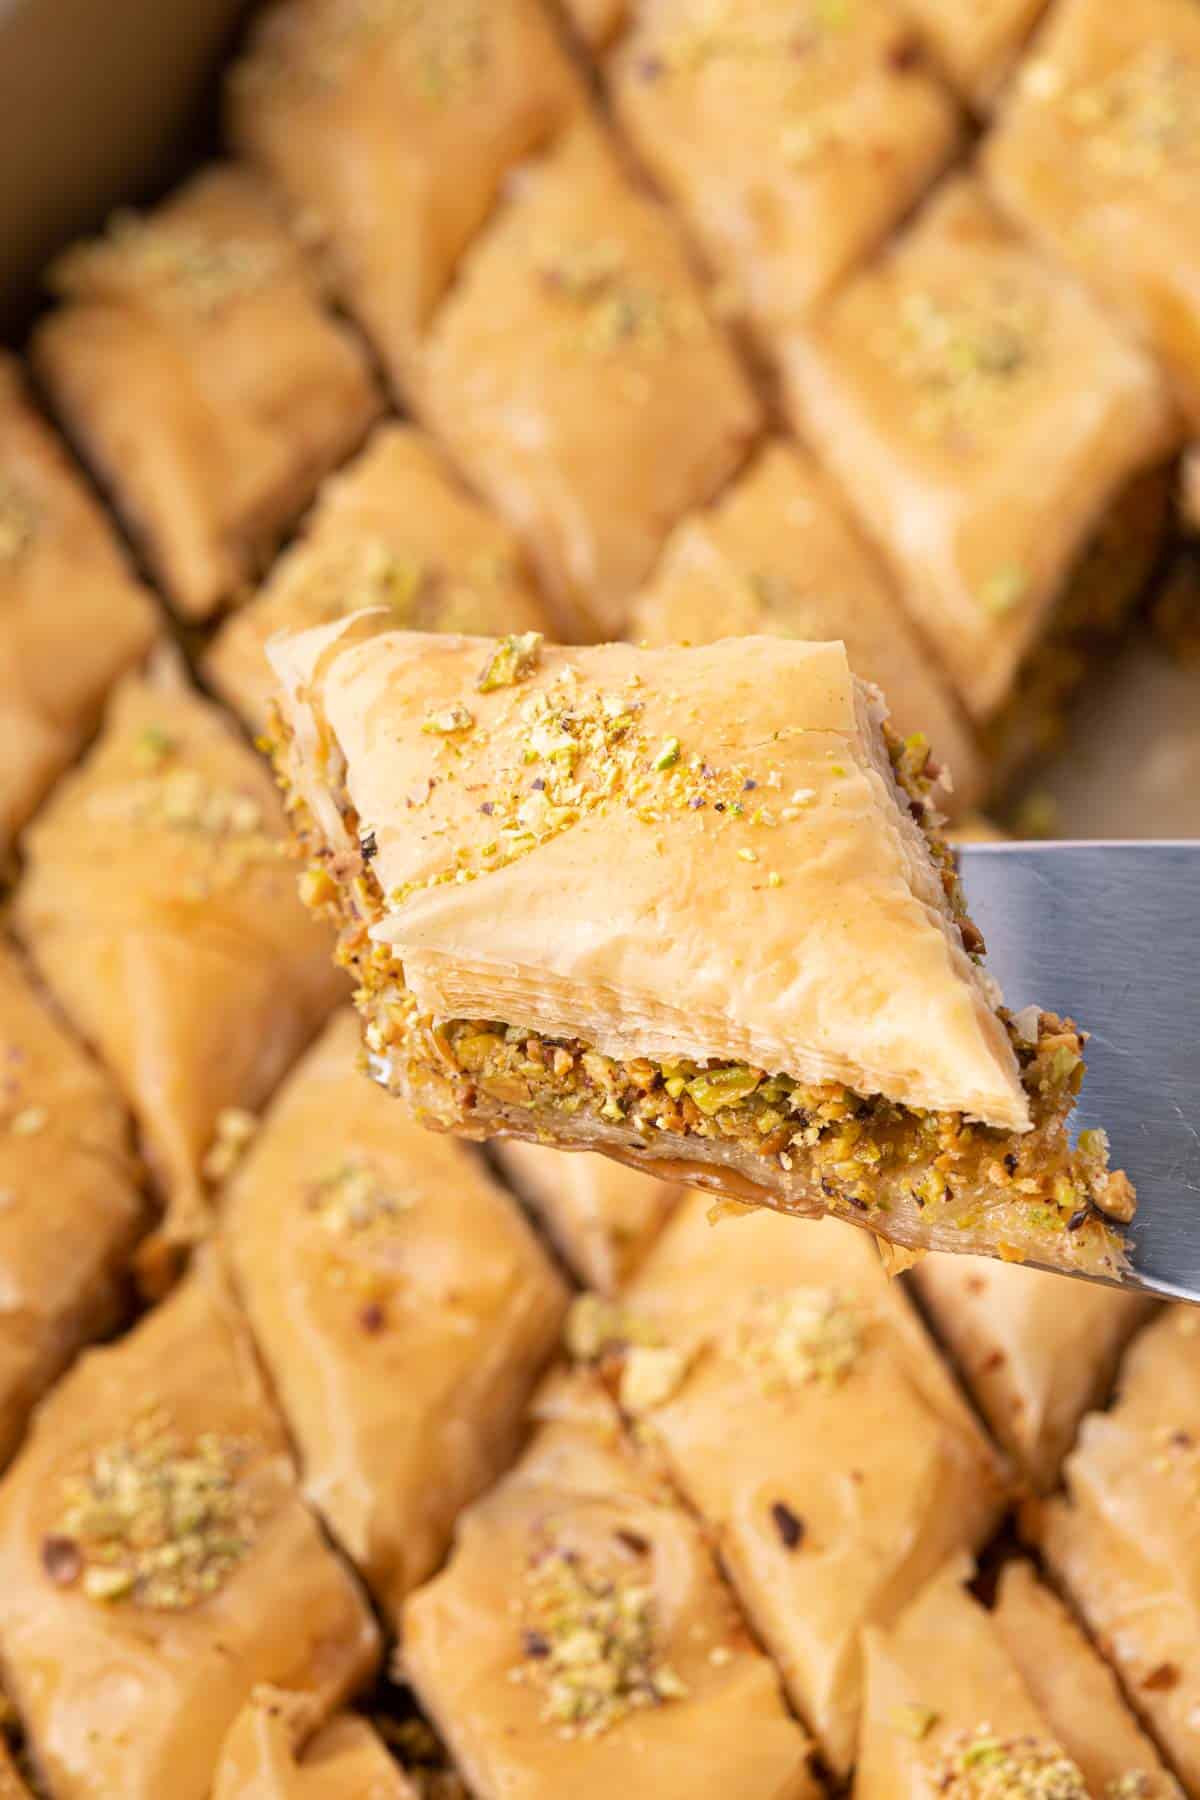 Spatula lifting up a diamond shaped piece of pistachio baklava with full try below it.